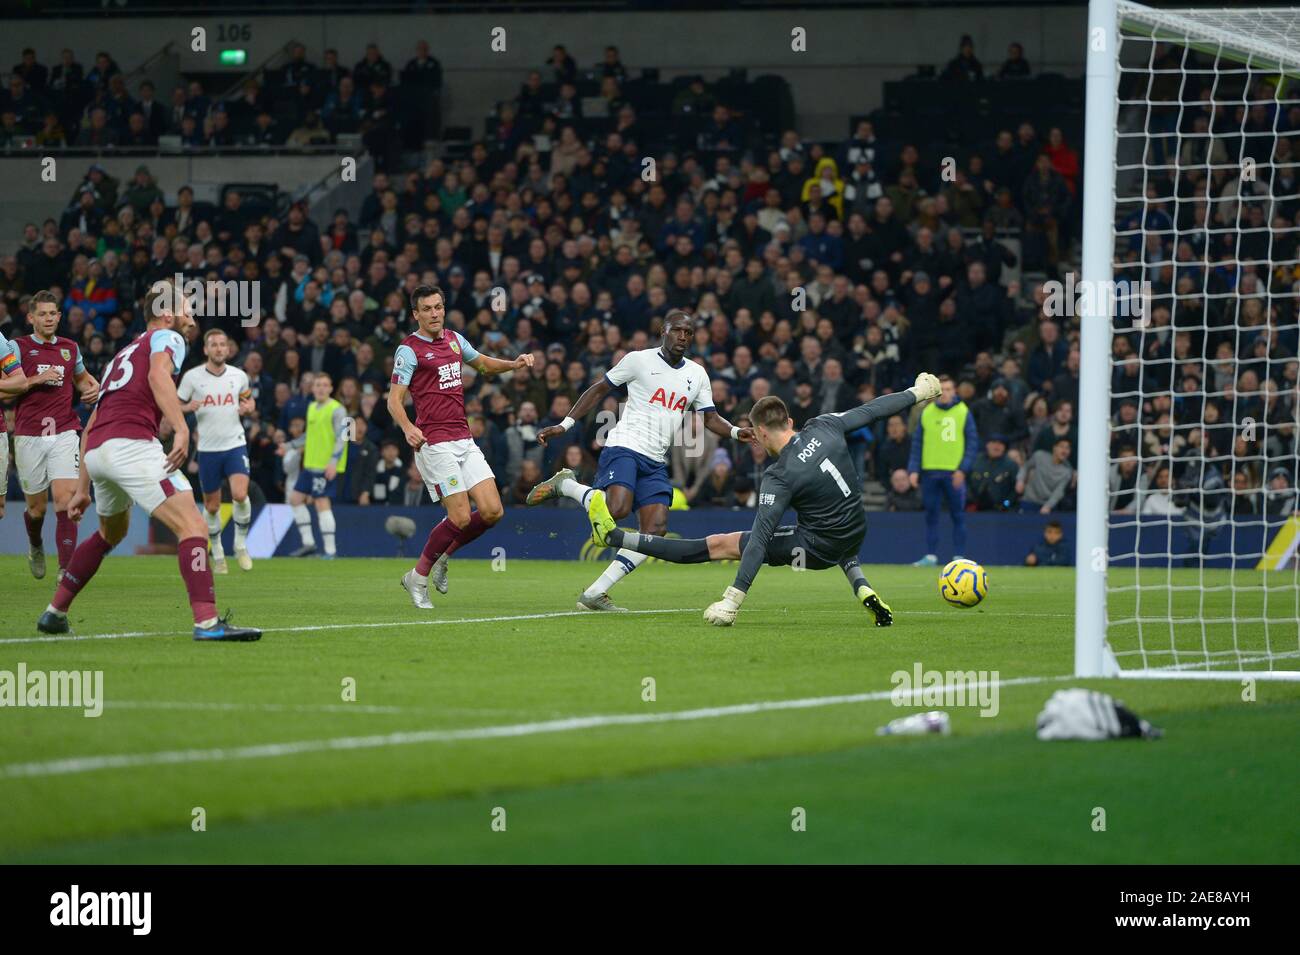 London, UK. 7th December 2019. GOAL Moussa Sissoko of Tottenham Hotspur scores the fifth goal during the Tottenham Hotspur vs Burnley Premier League Football match at the Tottenham Hotspur Stadium on 7th December 2019-EDITORIAL USE ONLY No use with unauthorised audio, video, data, fixture lists (outside the EU), club/league logos or 'live' services. Online in-match use limited to 45 images (+15 in extra time). No use to emulate moving images. No use in betting, games or single club/league/player publications/services- Credit: Martin Dalton/Alamy Live News Stock Photo